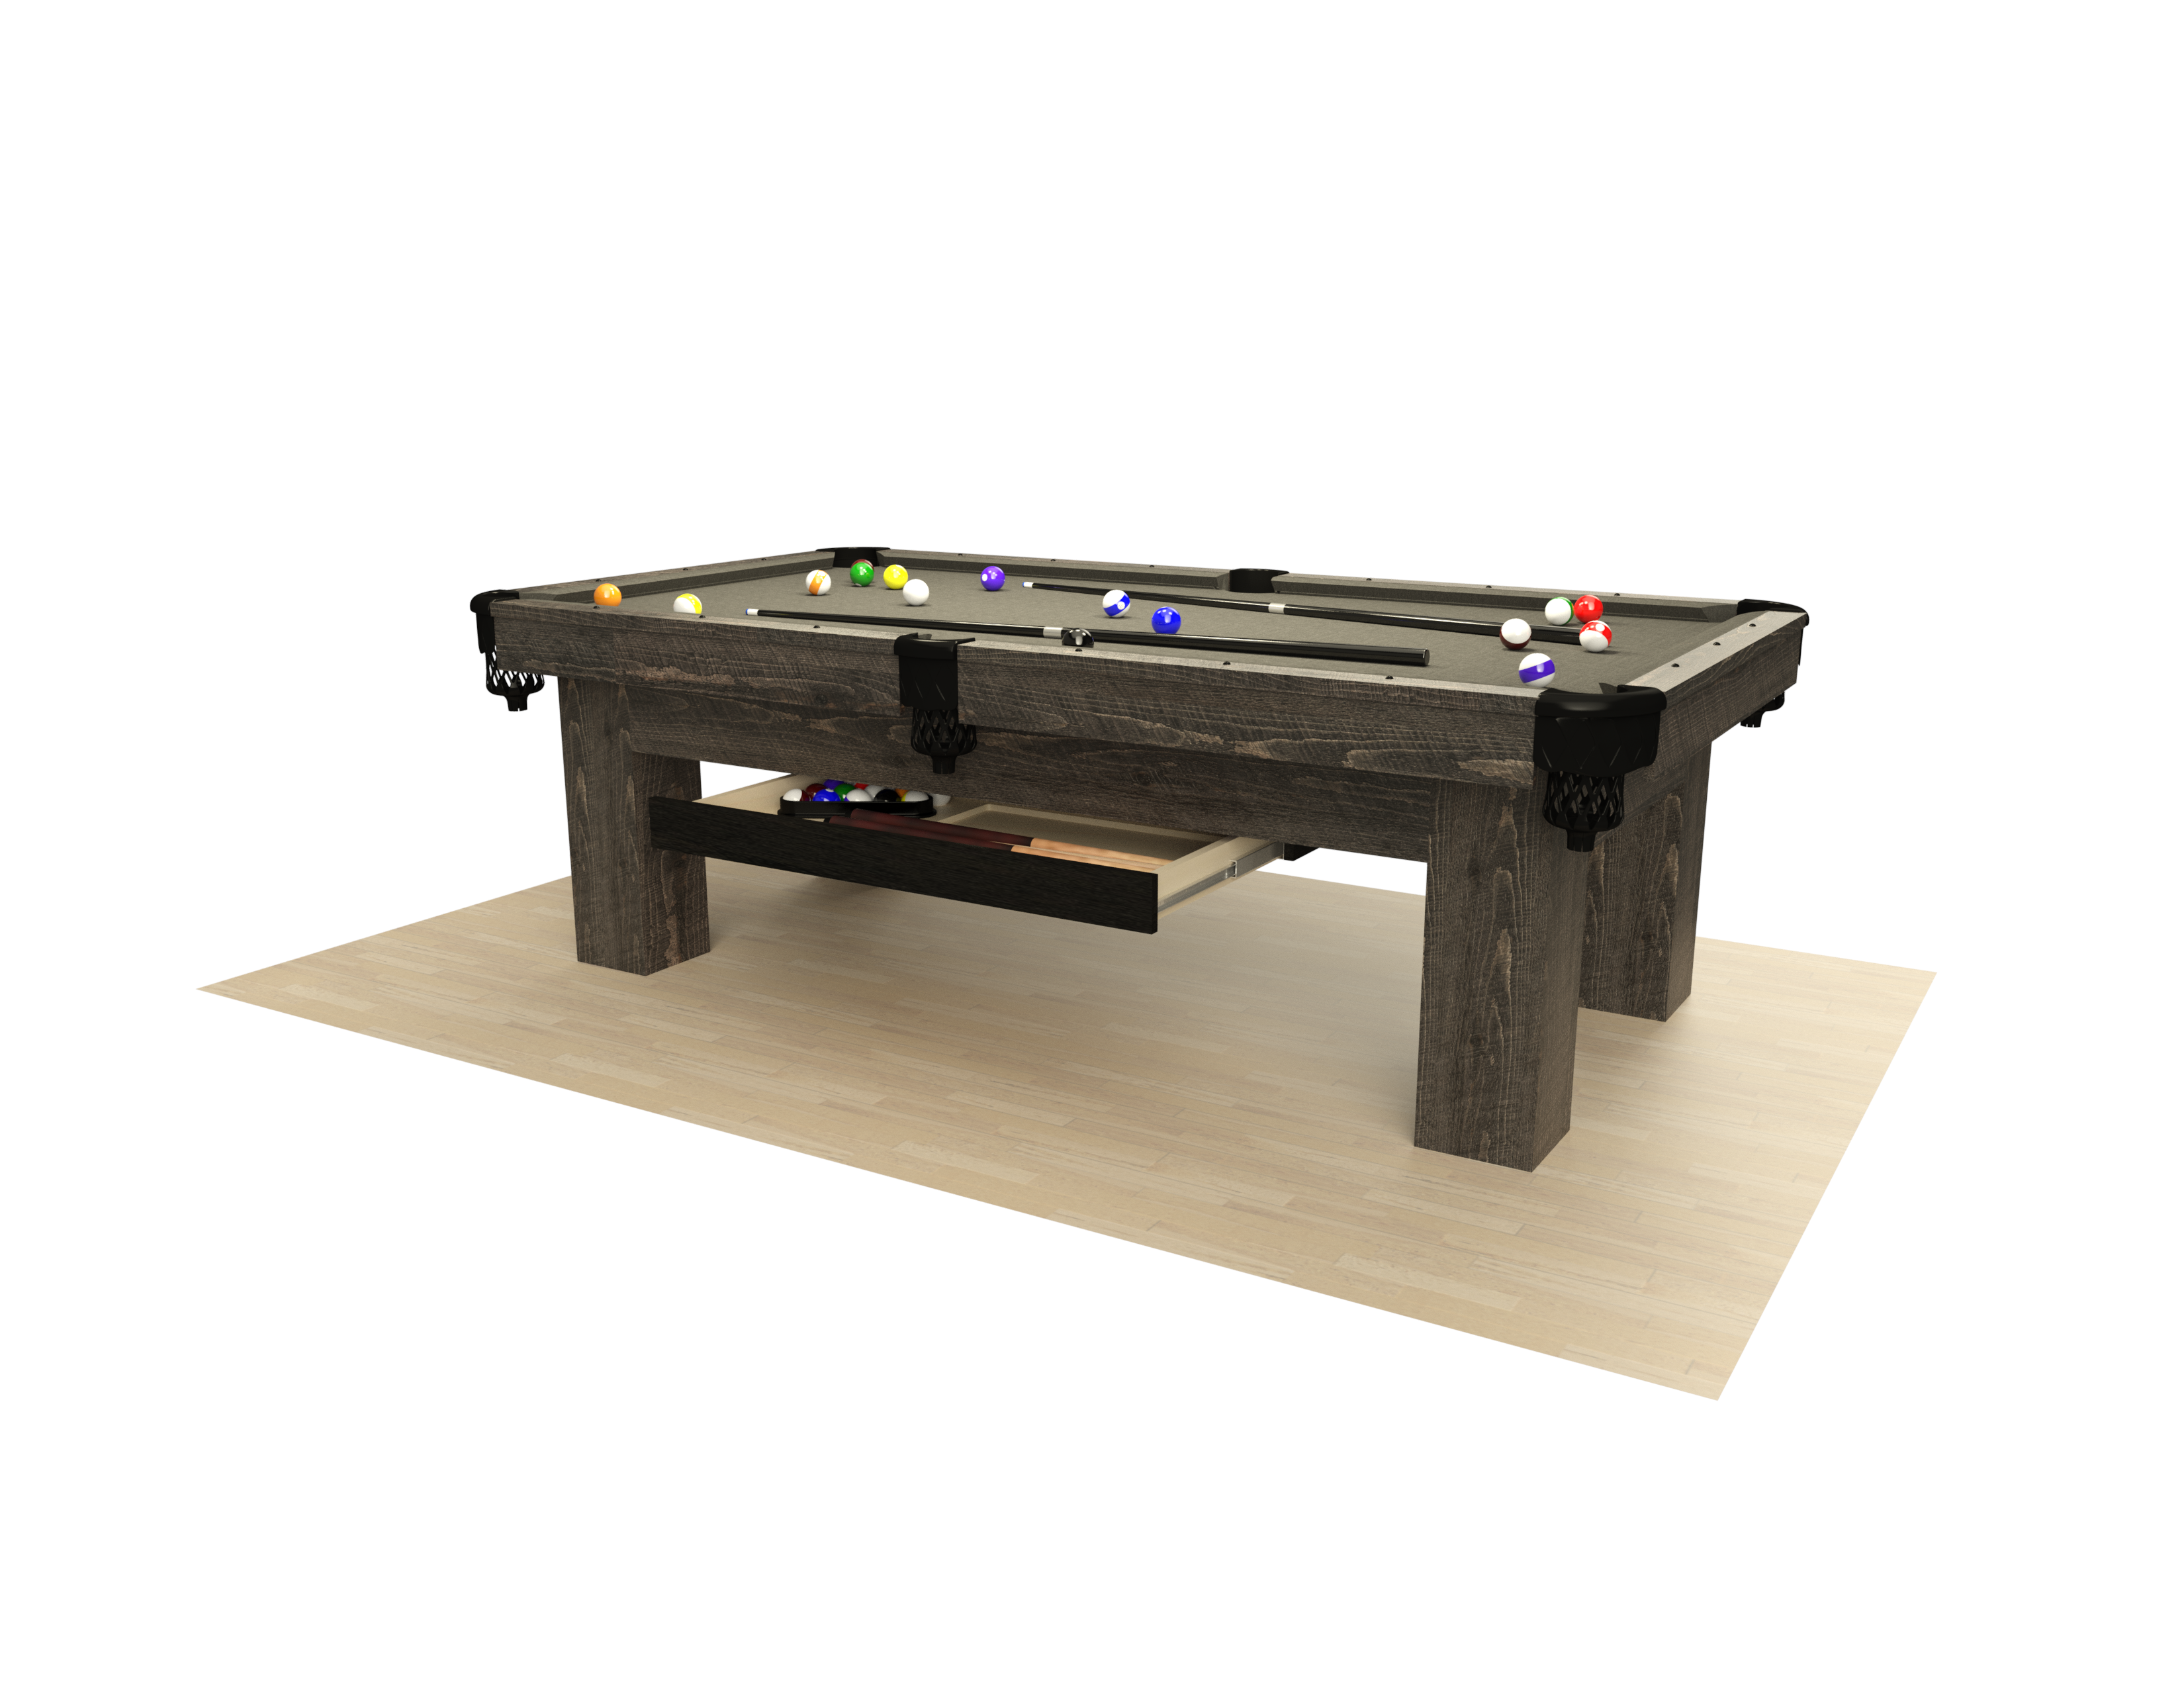 UNIVERSAL SHORT SIDE DRAWER FOR POOL TABLE